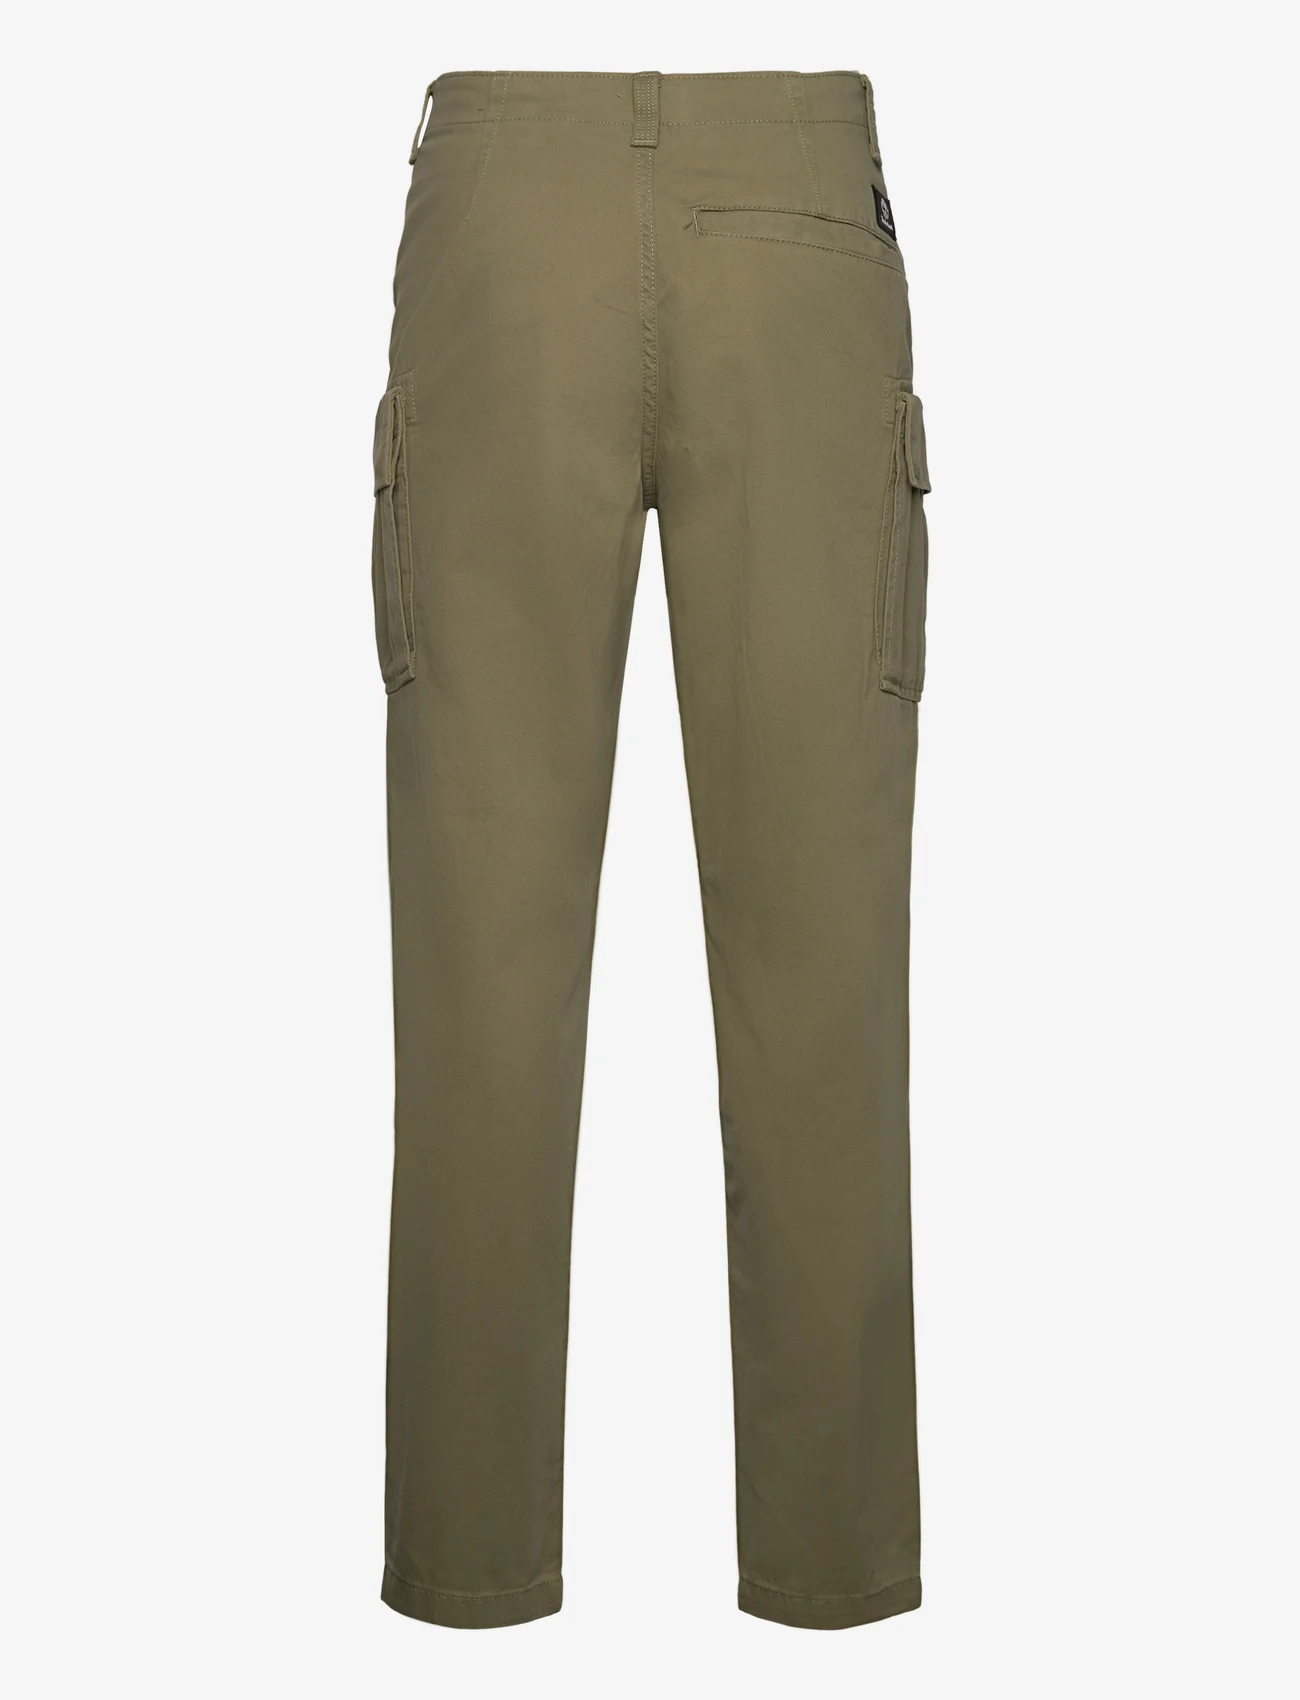 Timberland - BROOKLINE Twill Cargo Pant CASSEL EARTH - cargo pants - cassel earth - 1